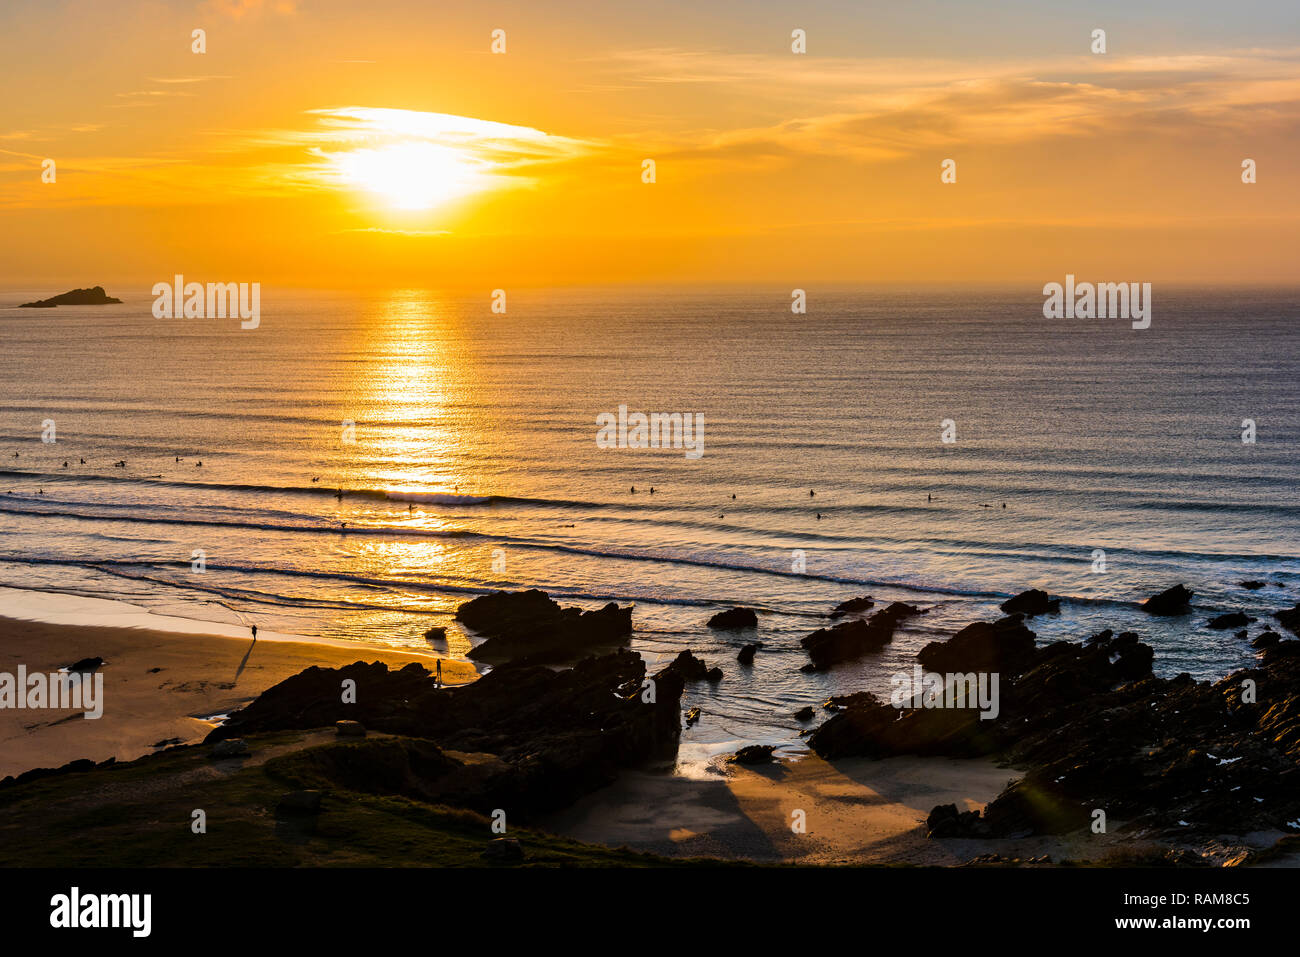 Surfers at sunset on Fistral Beach, Newquay, Cornwall, UK Stock Photo